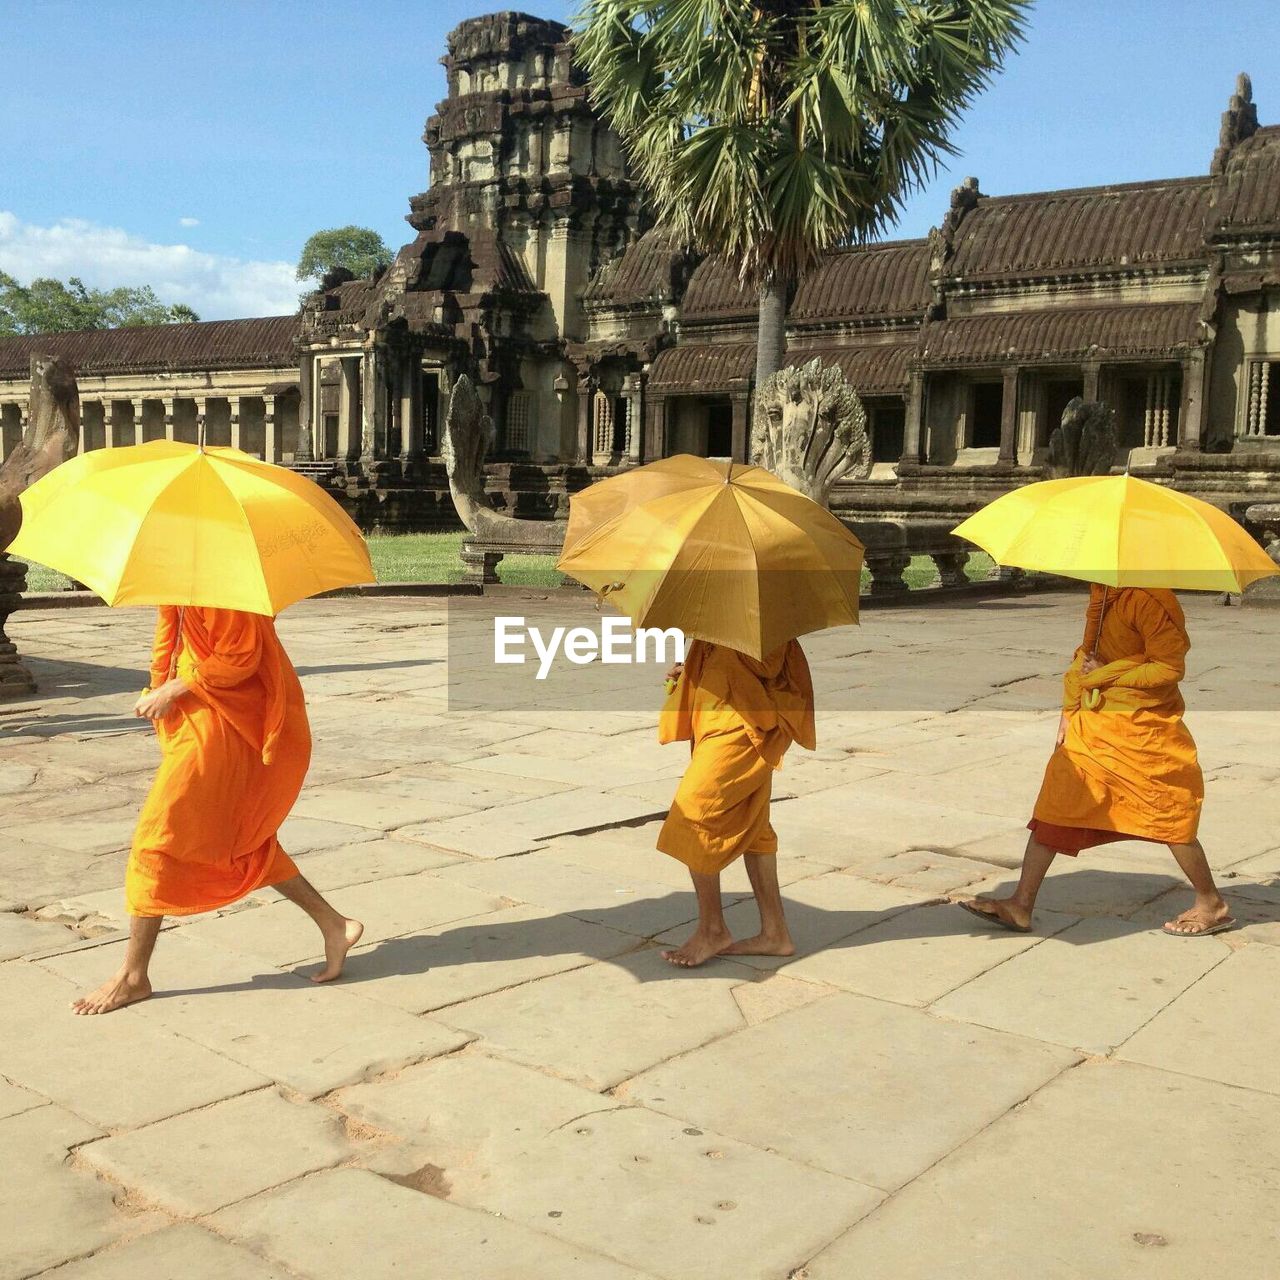 Monks with yellow umbrellas walking outside angkor wat temple